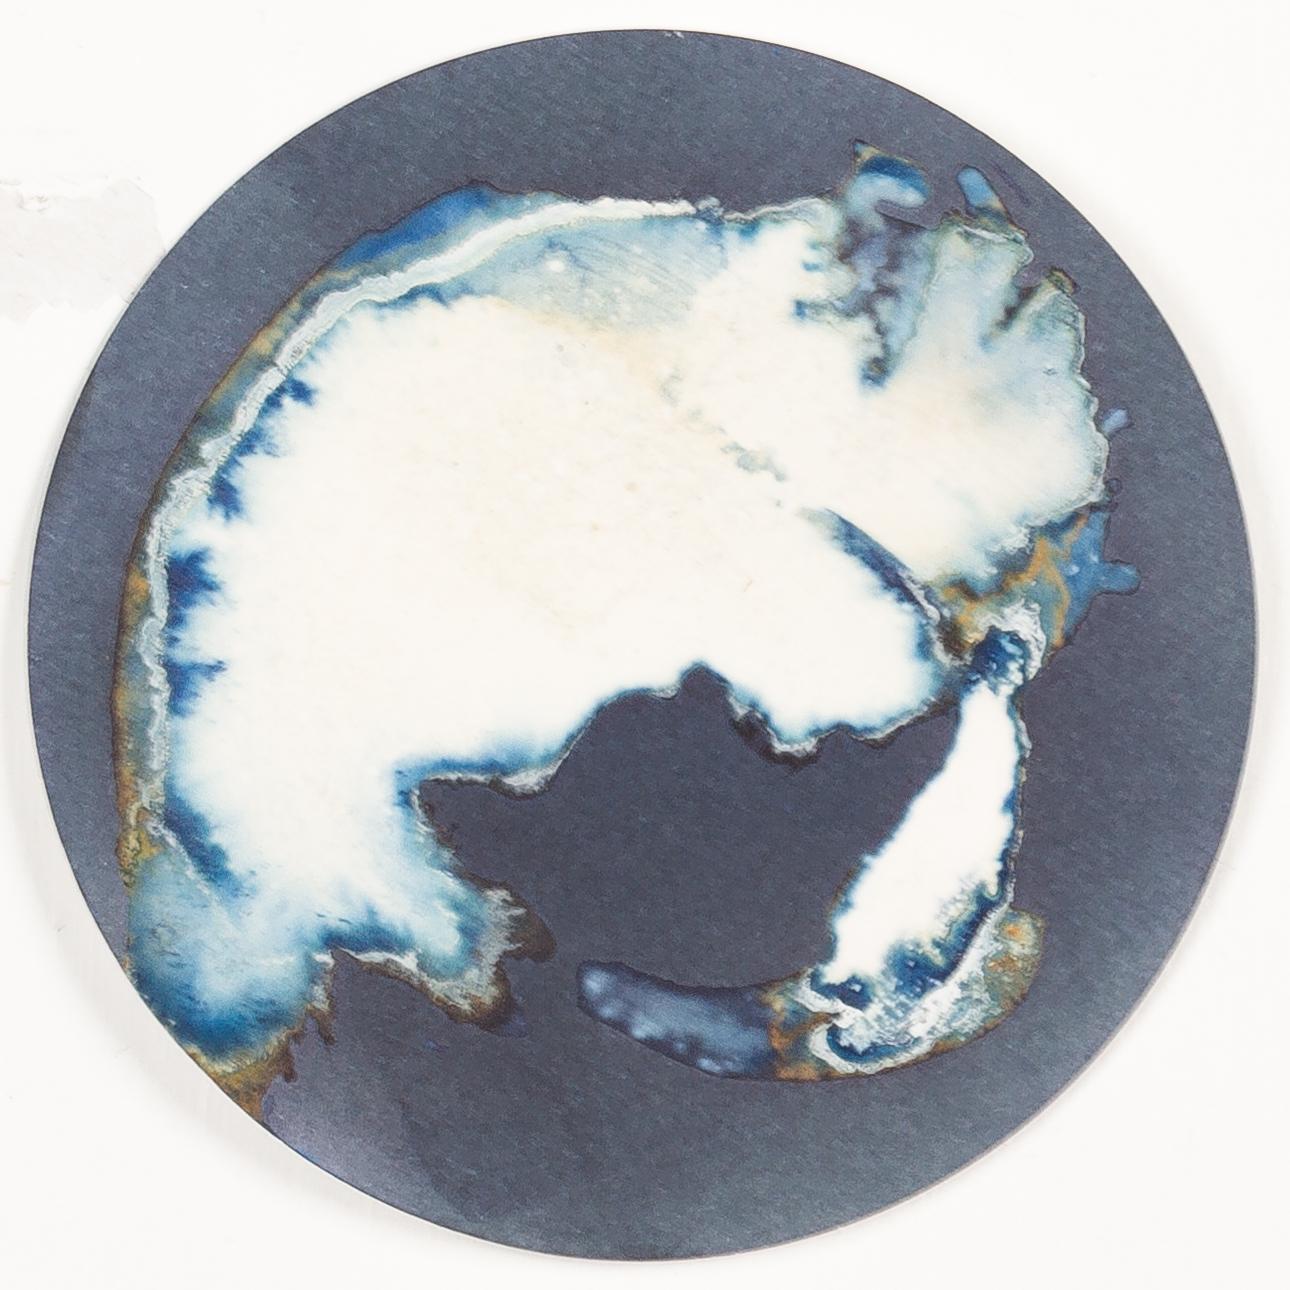 Esponjas 8, 11 y 16. Cyanotype photograhs mounted in high resistance glass dish For Sale 1